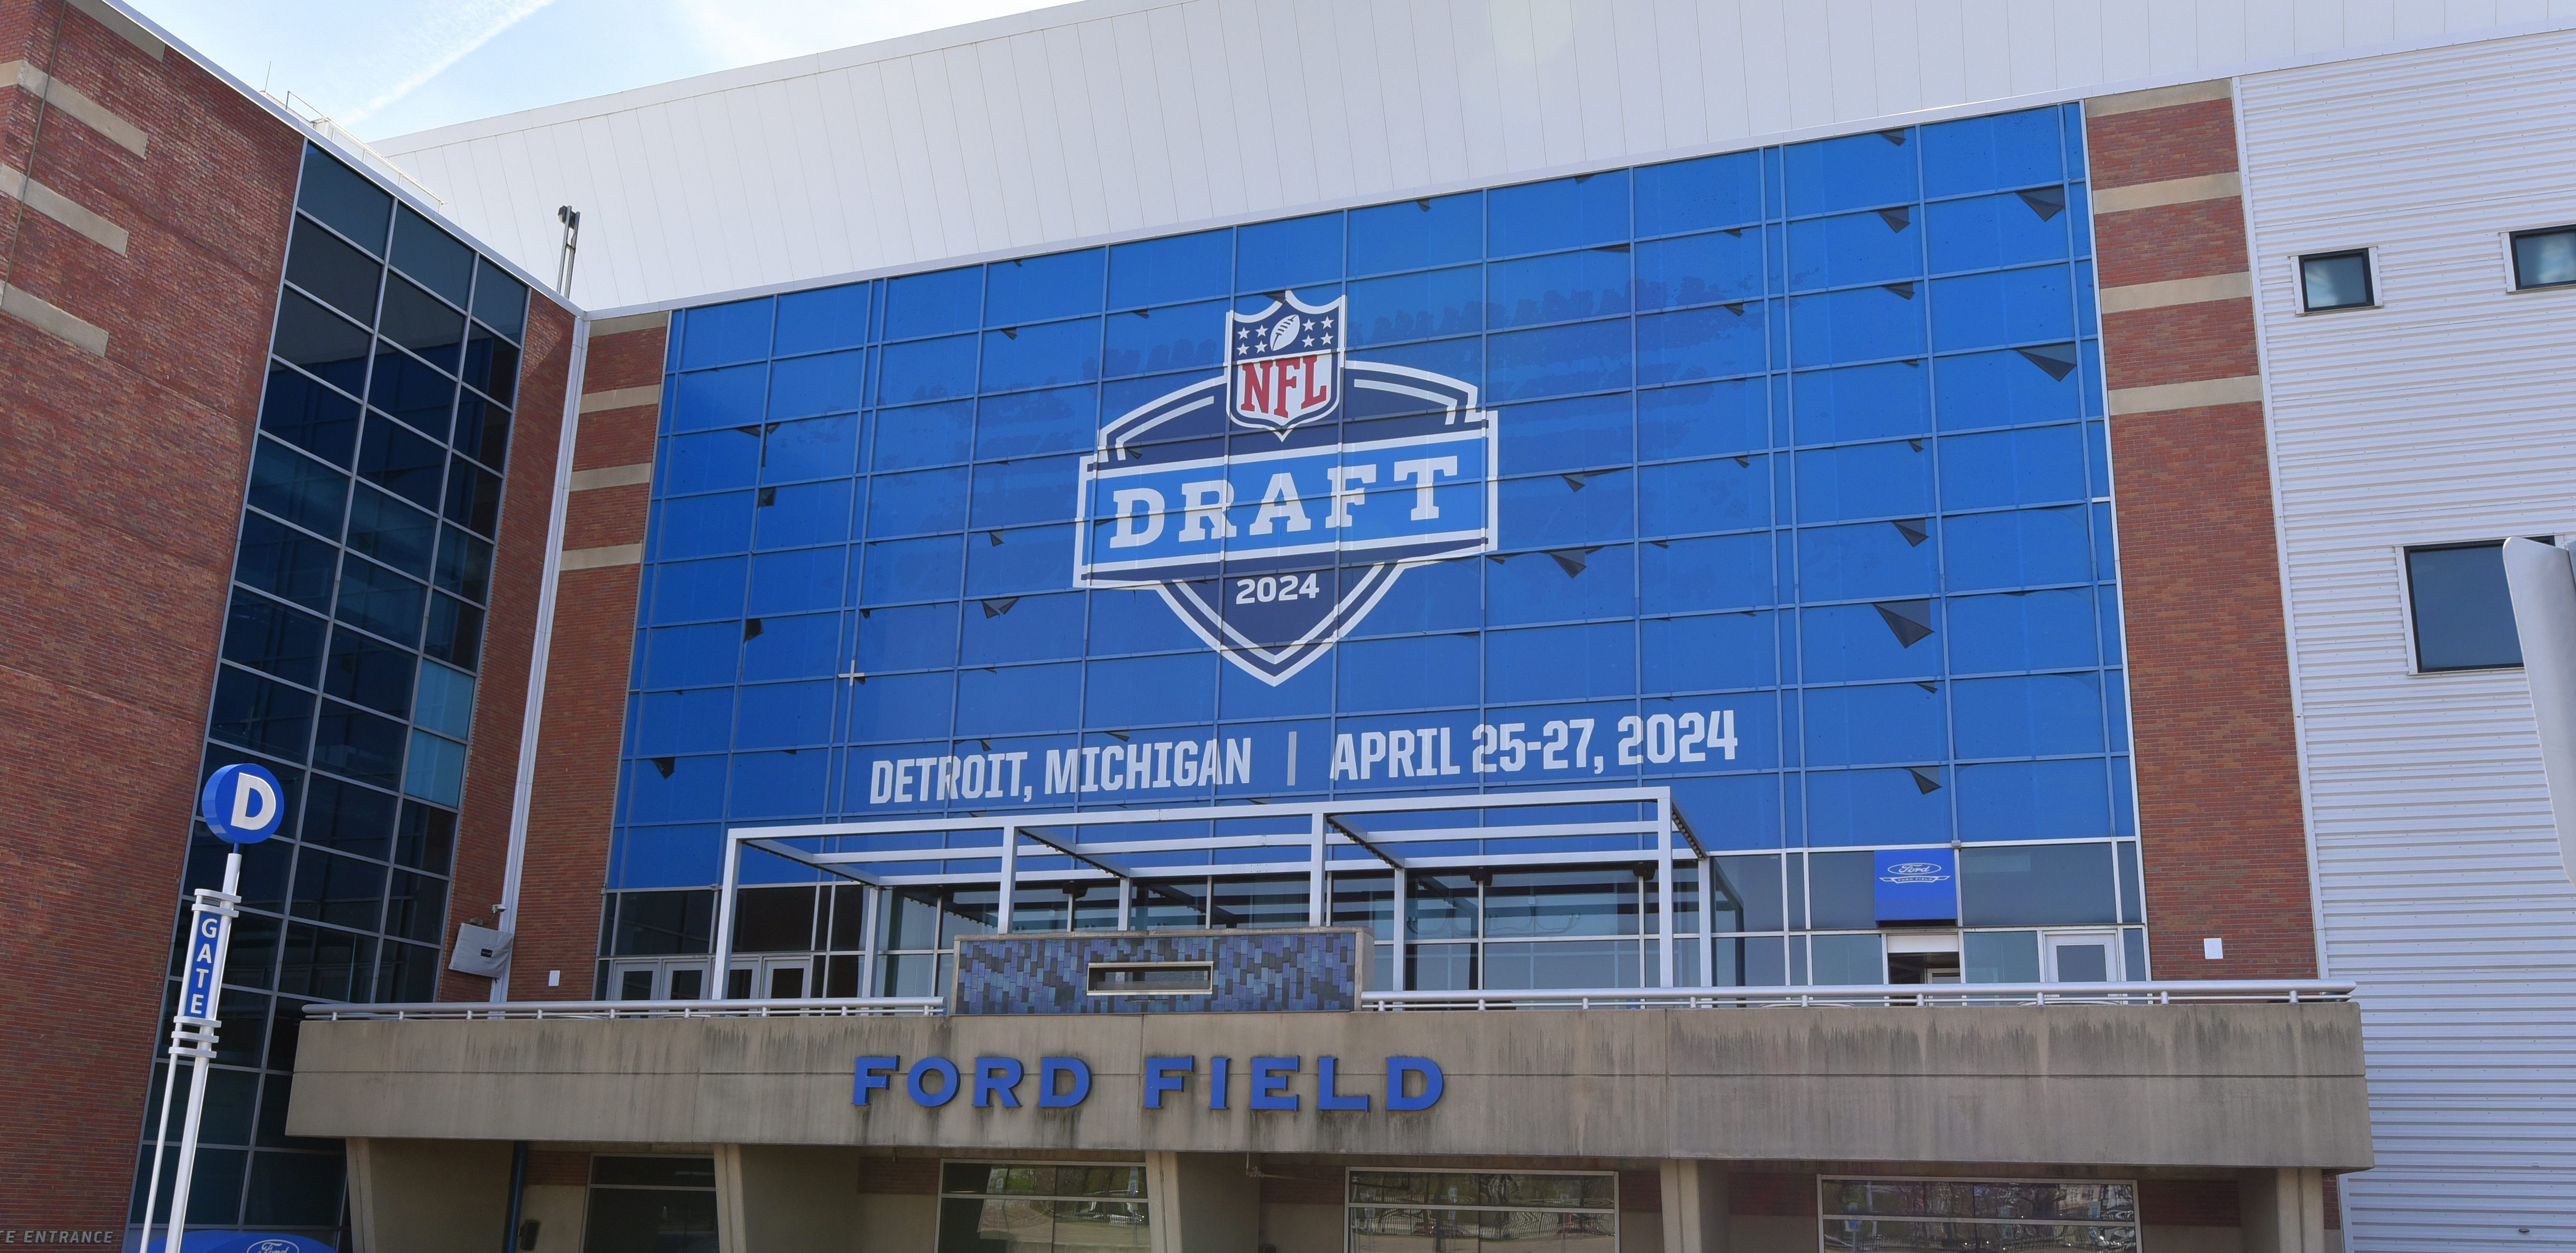 What time does the NFL Draft start tonight? Bears are first on the
clock